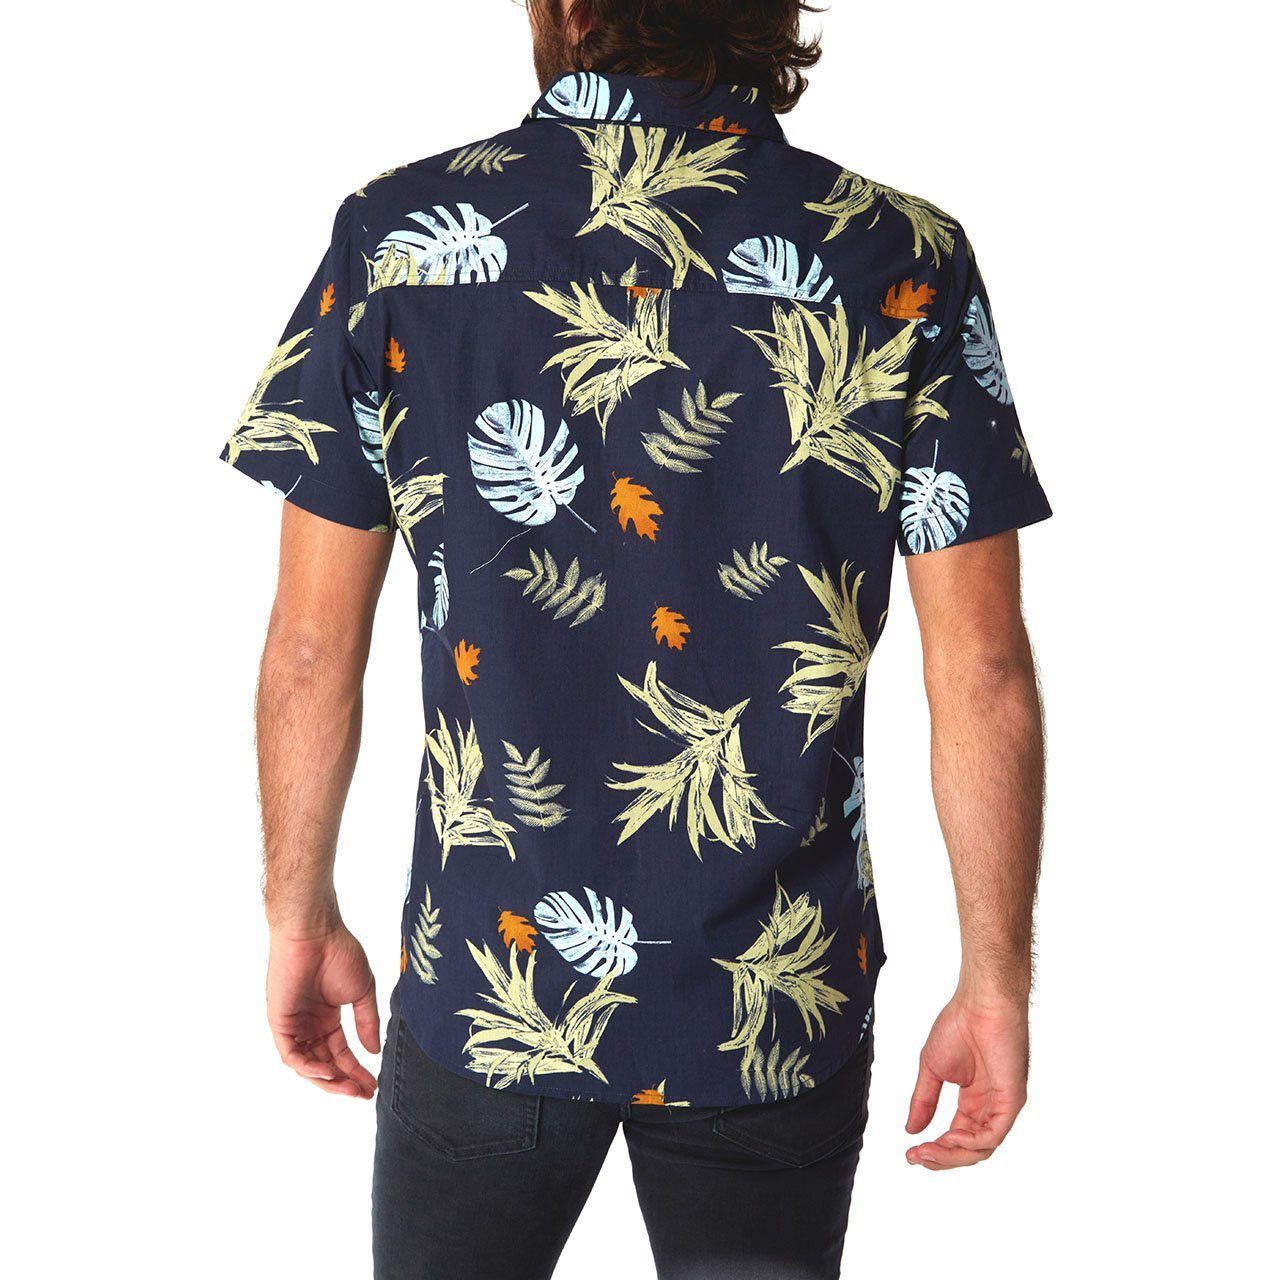 Picture of a Men's Button Up Navy Floral Short Sleeve Shirt back view